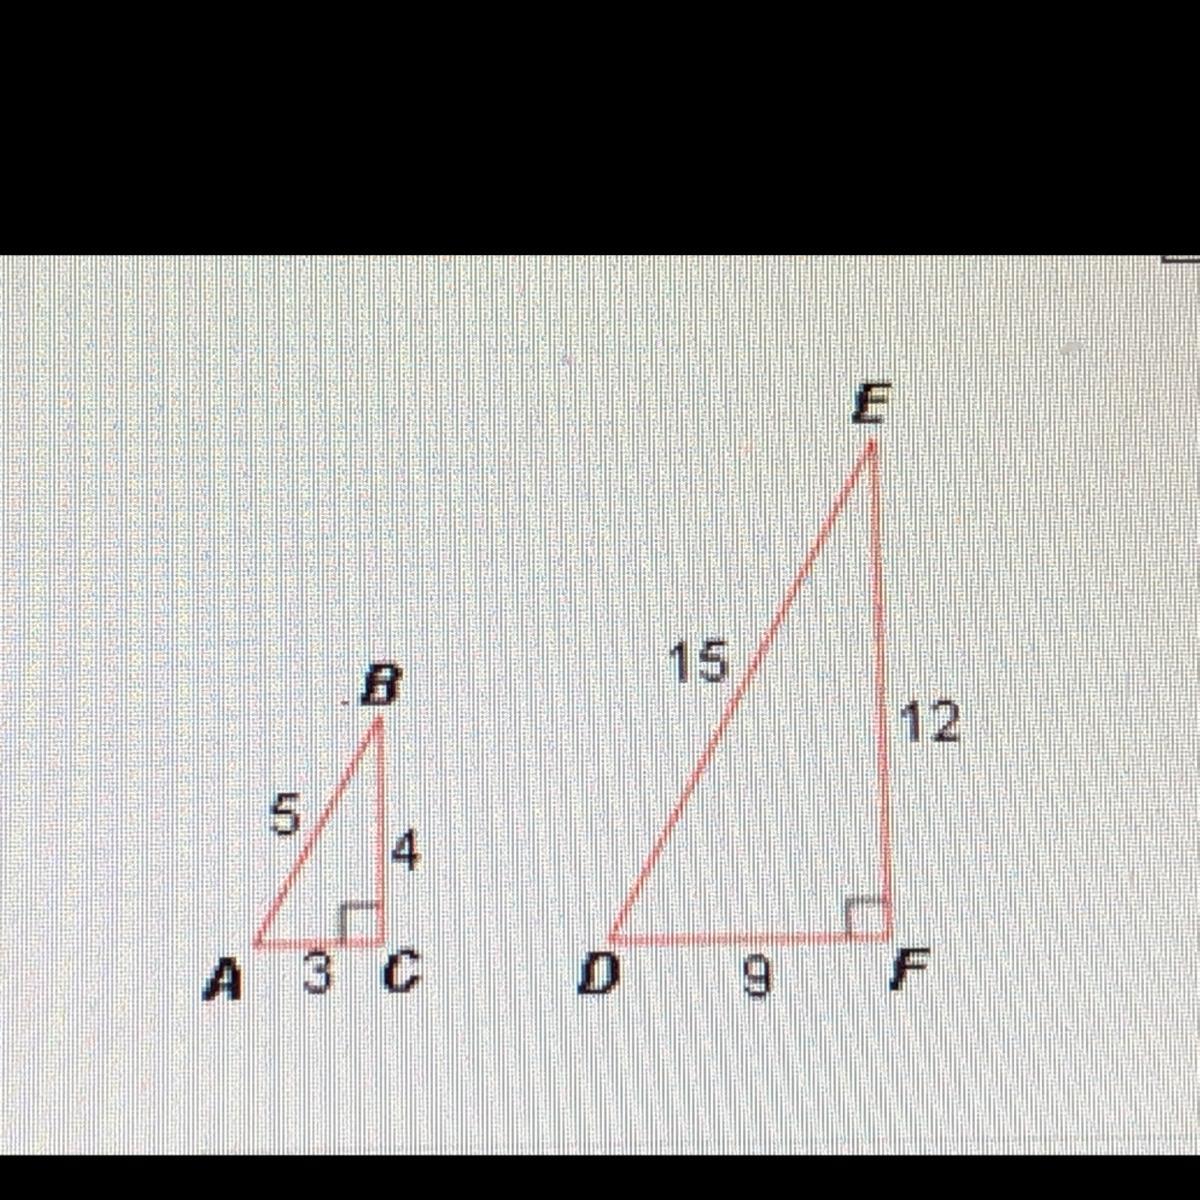 What Is The Scale Factor Of Triangle ABC To Triangle DEF?A. 3 B. 1/2C. 2D. 1/3